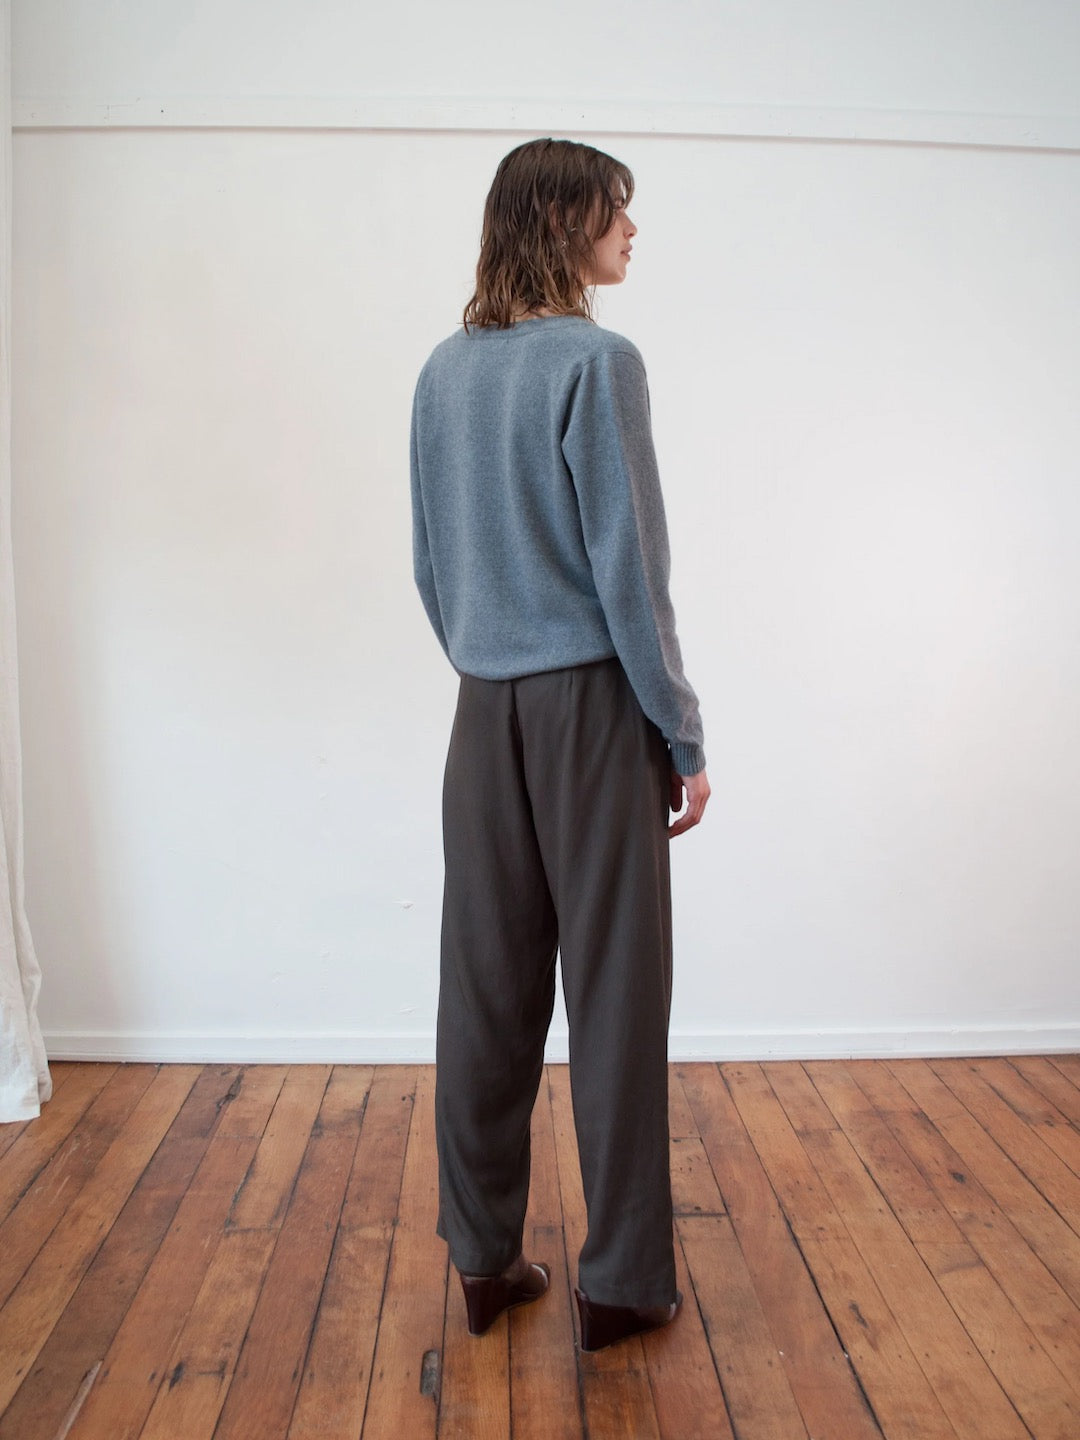 A woman is standing in a room wearing a Kom Cardigan - Stone by OVNA OVICH and trousers.